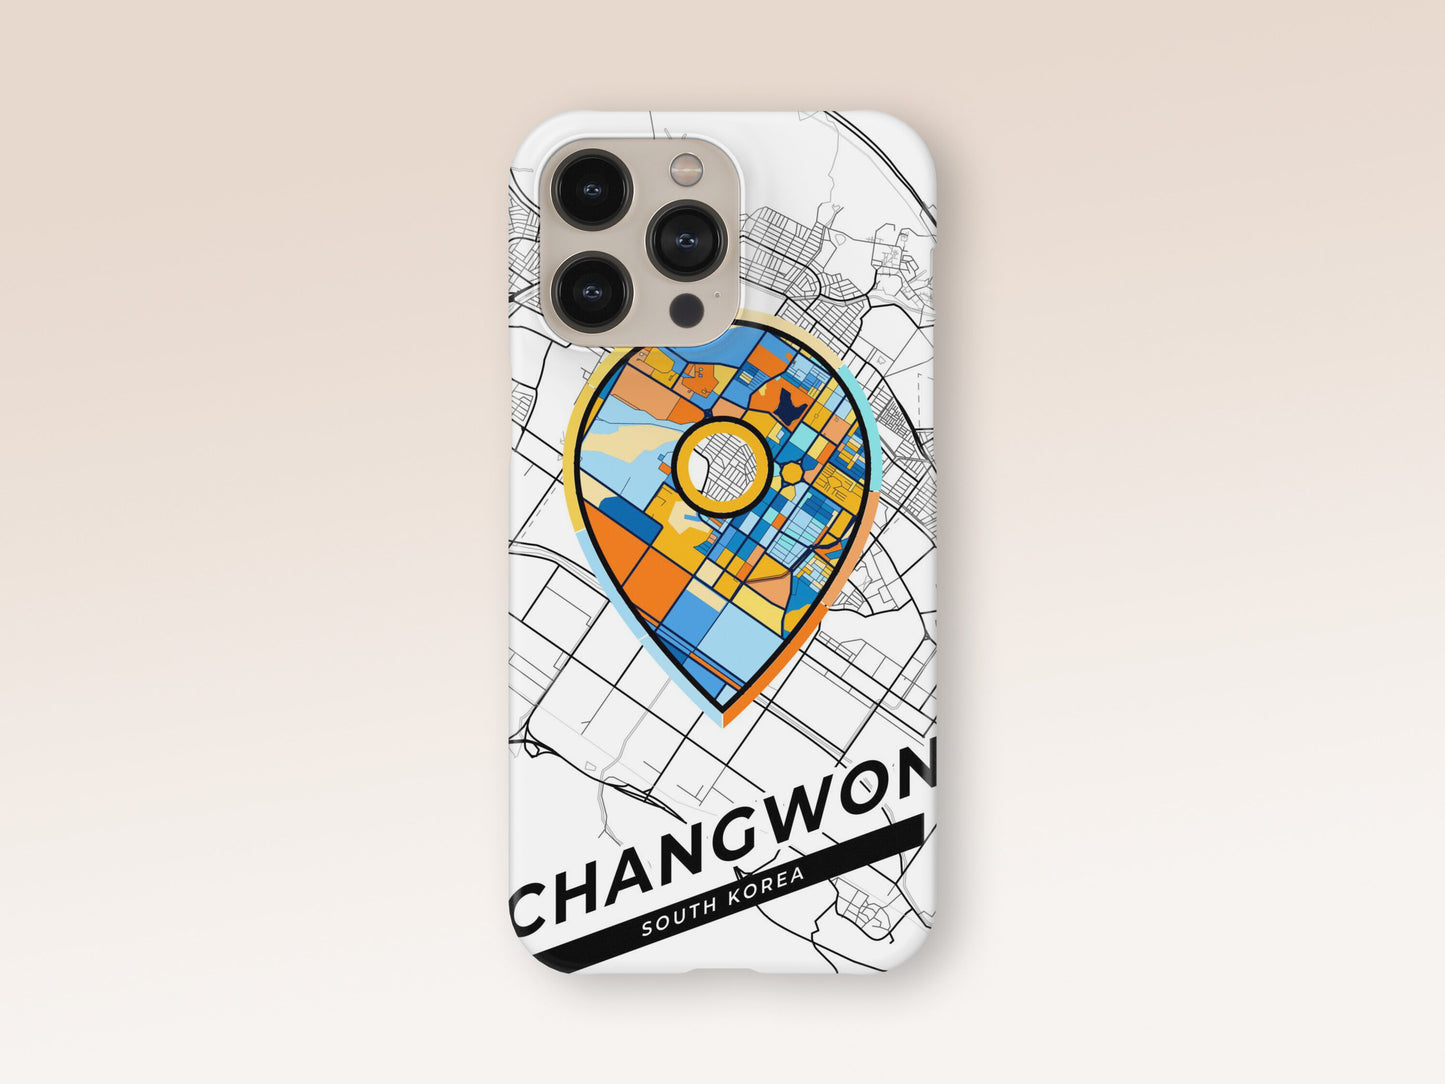 Changwon South Korea slim phone case with colorful icon. Birthday, wedding or housewarming gift. Couple match cases. 1